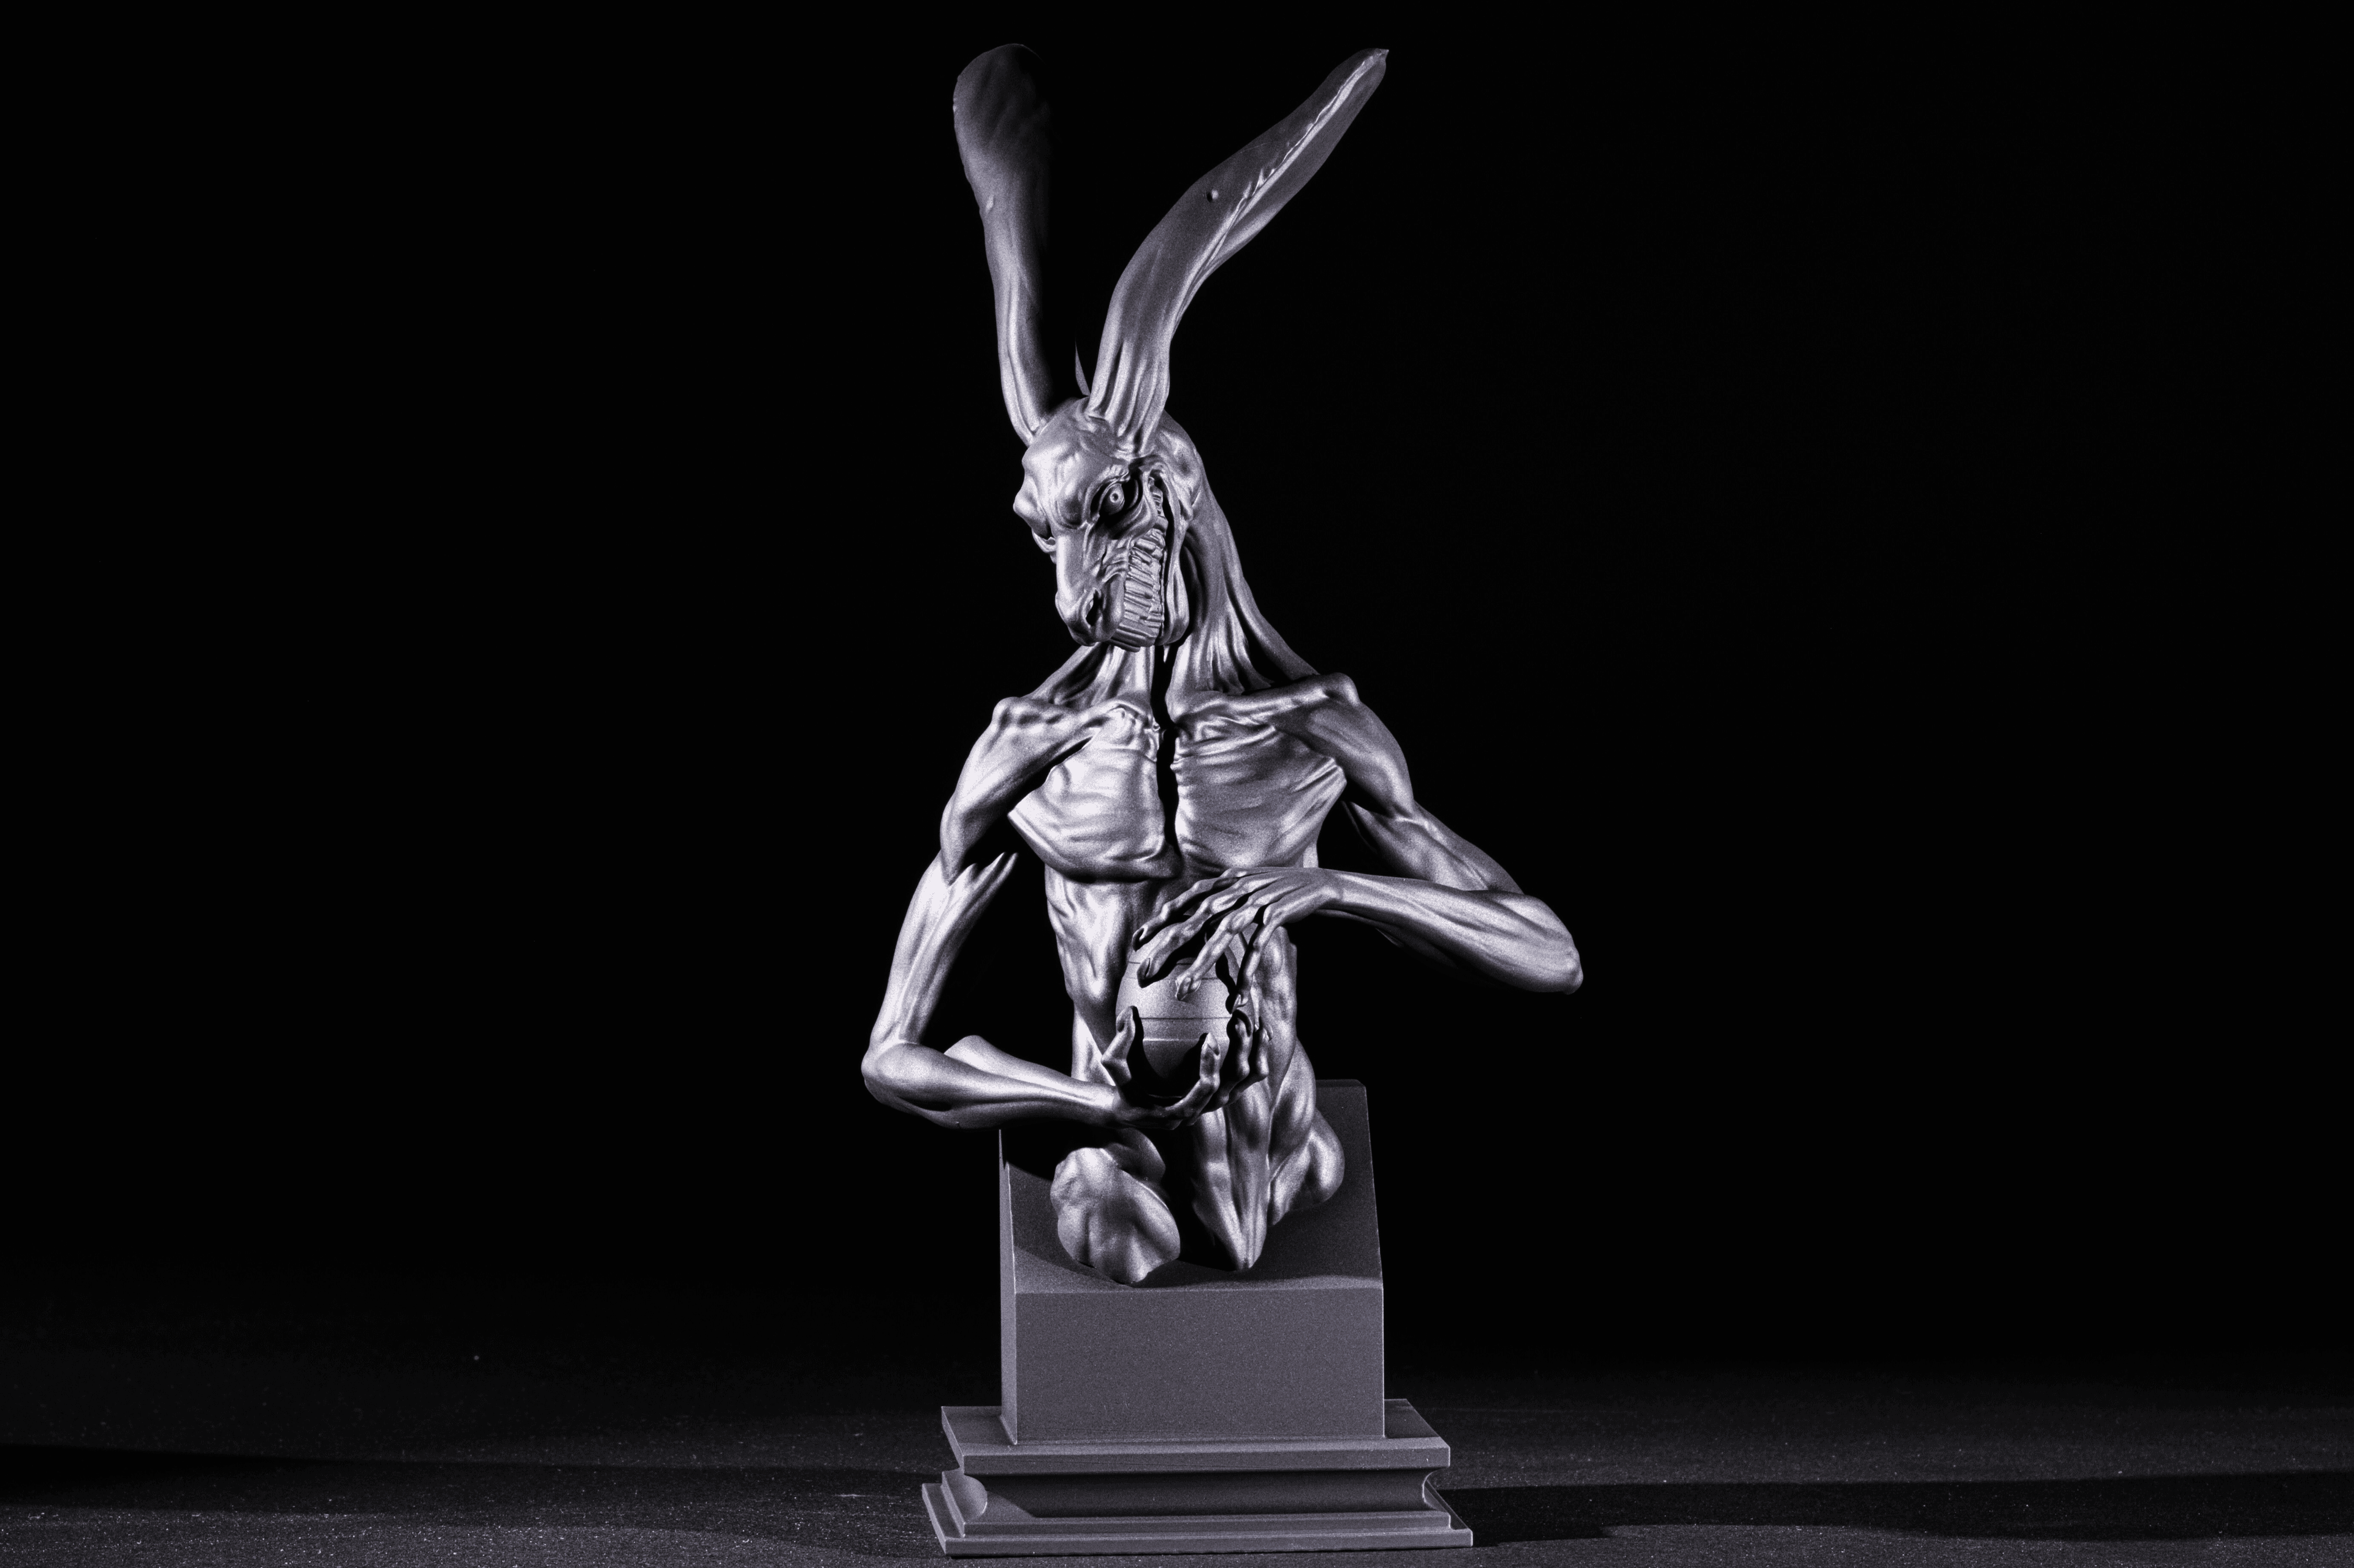 Anti-Easter Bunny (Pre Supported) 3d model